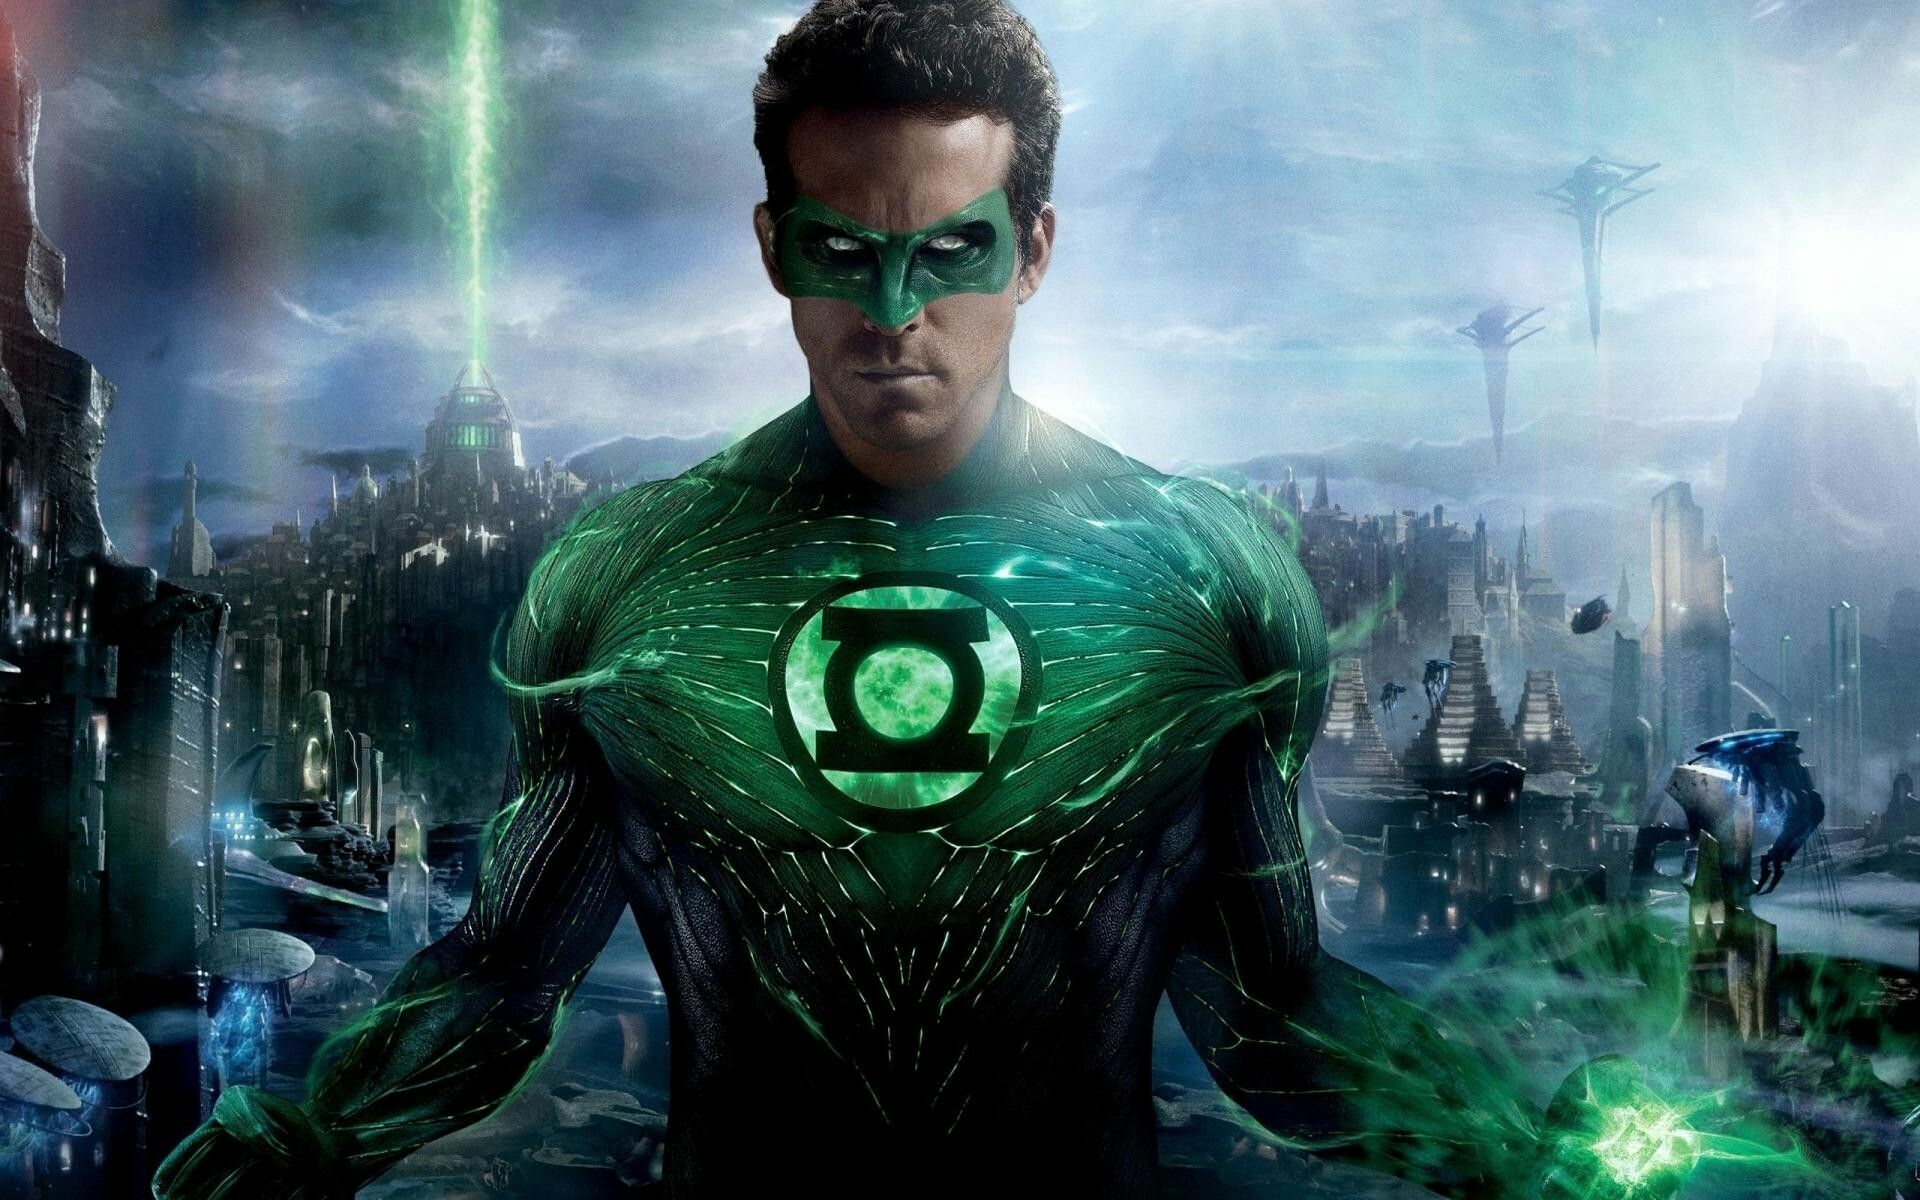 Green Lantern: A test pilot for the Ferris Aircraft Company, The first earthman ever inducted into an intergalactic peacekeeping force. 1920x1200 HD Wallpaper.